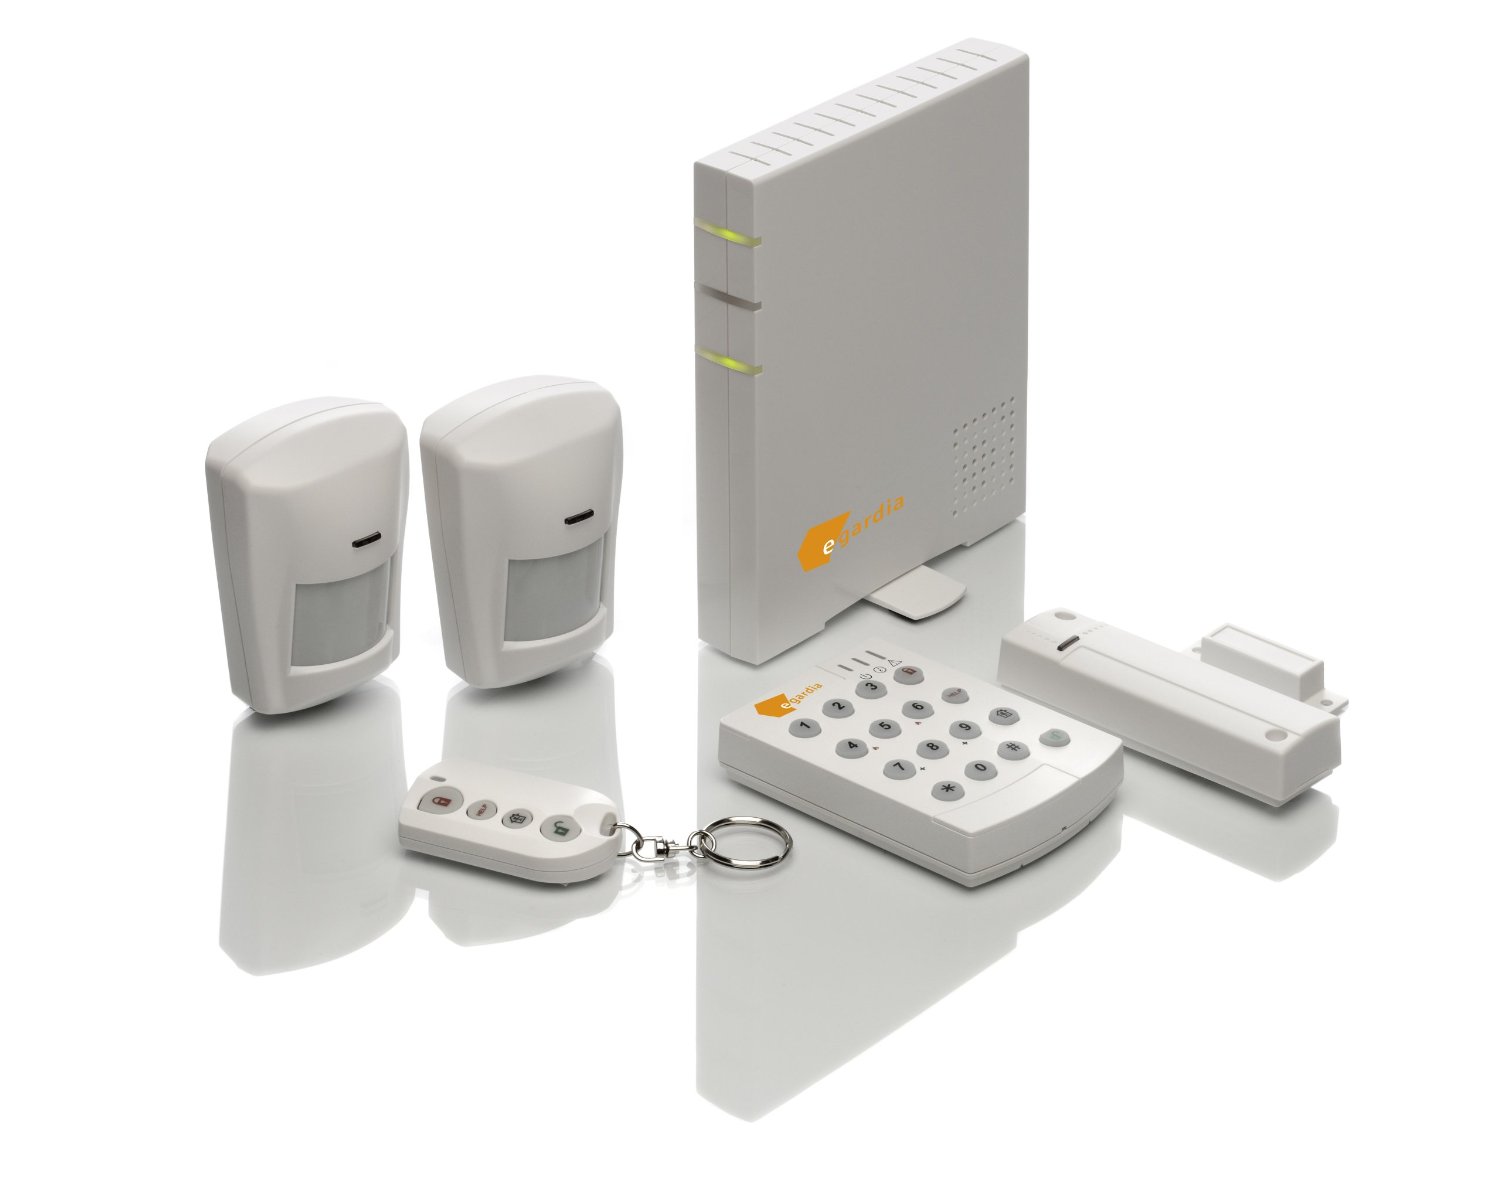 Review of the Egardia home alarm system